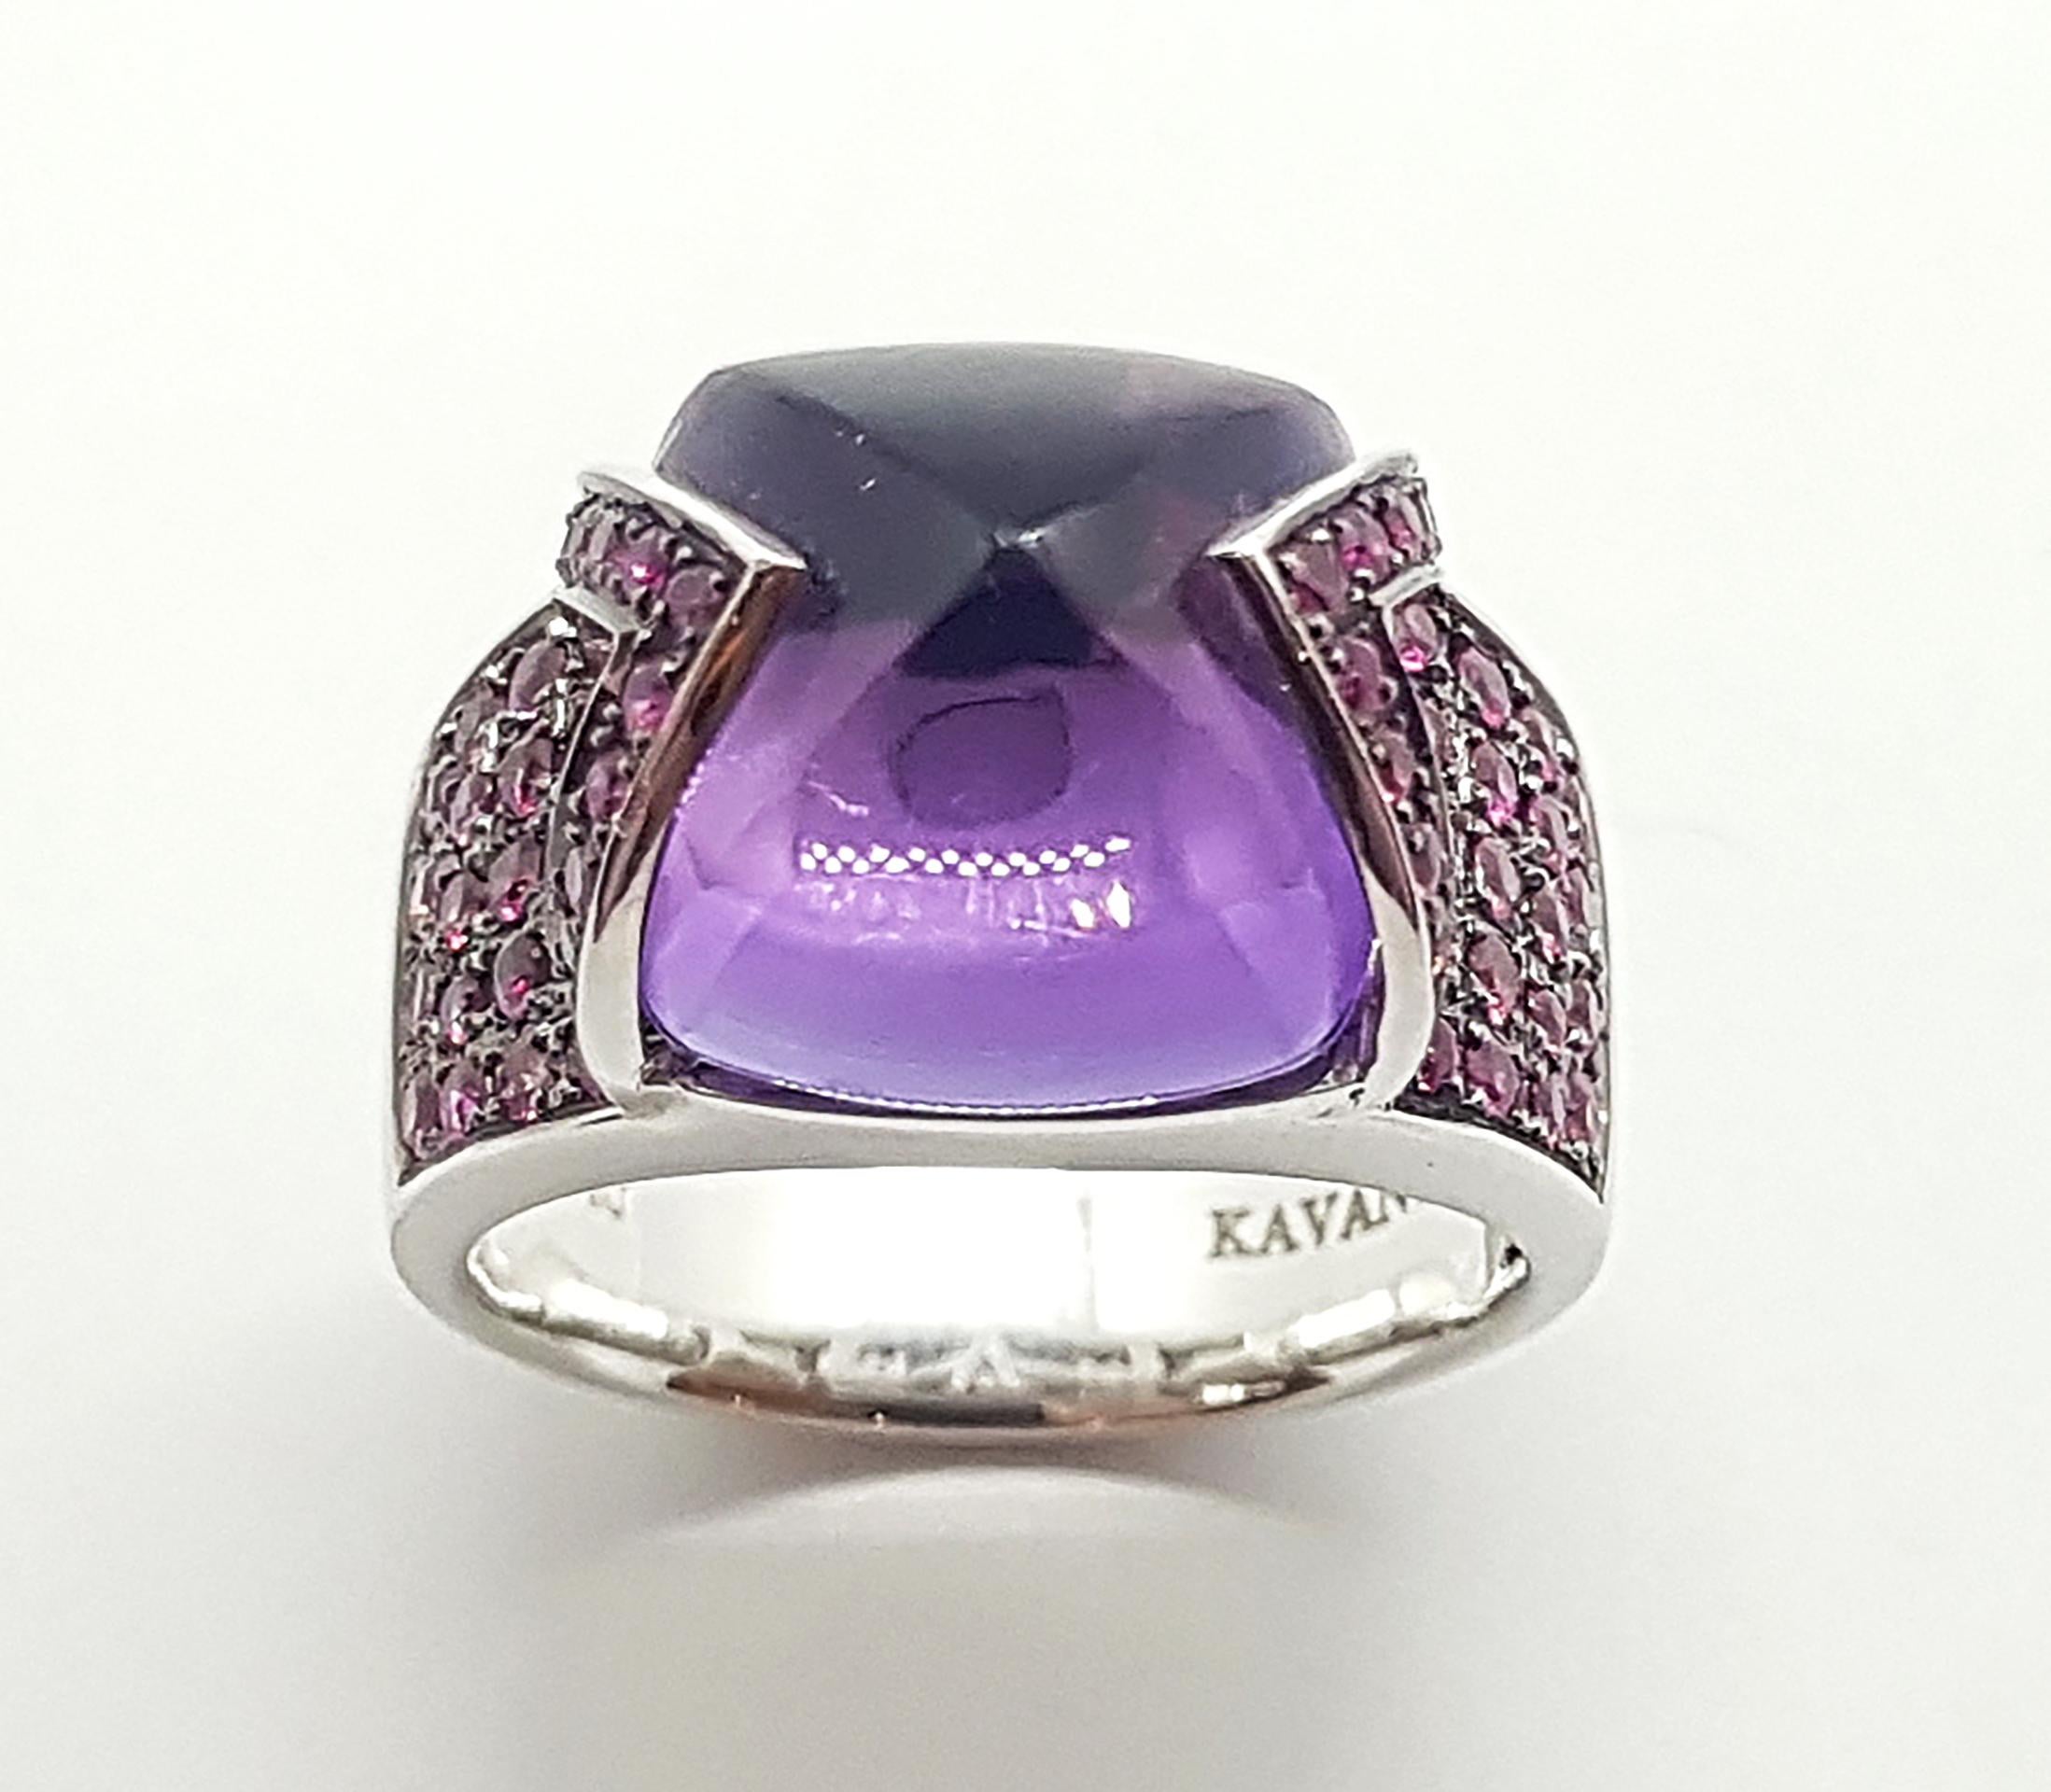 Amethyst 8.86 carats with Pink Sapphire 0.77 carat Ring set in 18 Karat White Gold Settings

Width:  1.3 cm 
Length:  1.2 cm
Ring Size: 52
Total Weight: 11.03 grams

